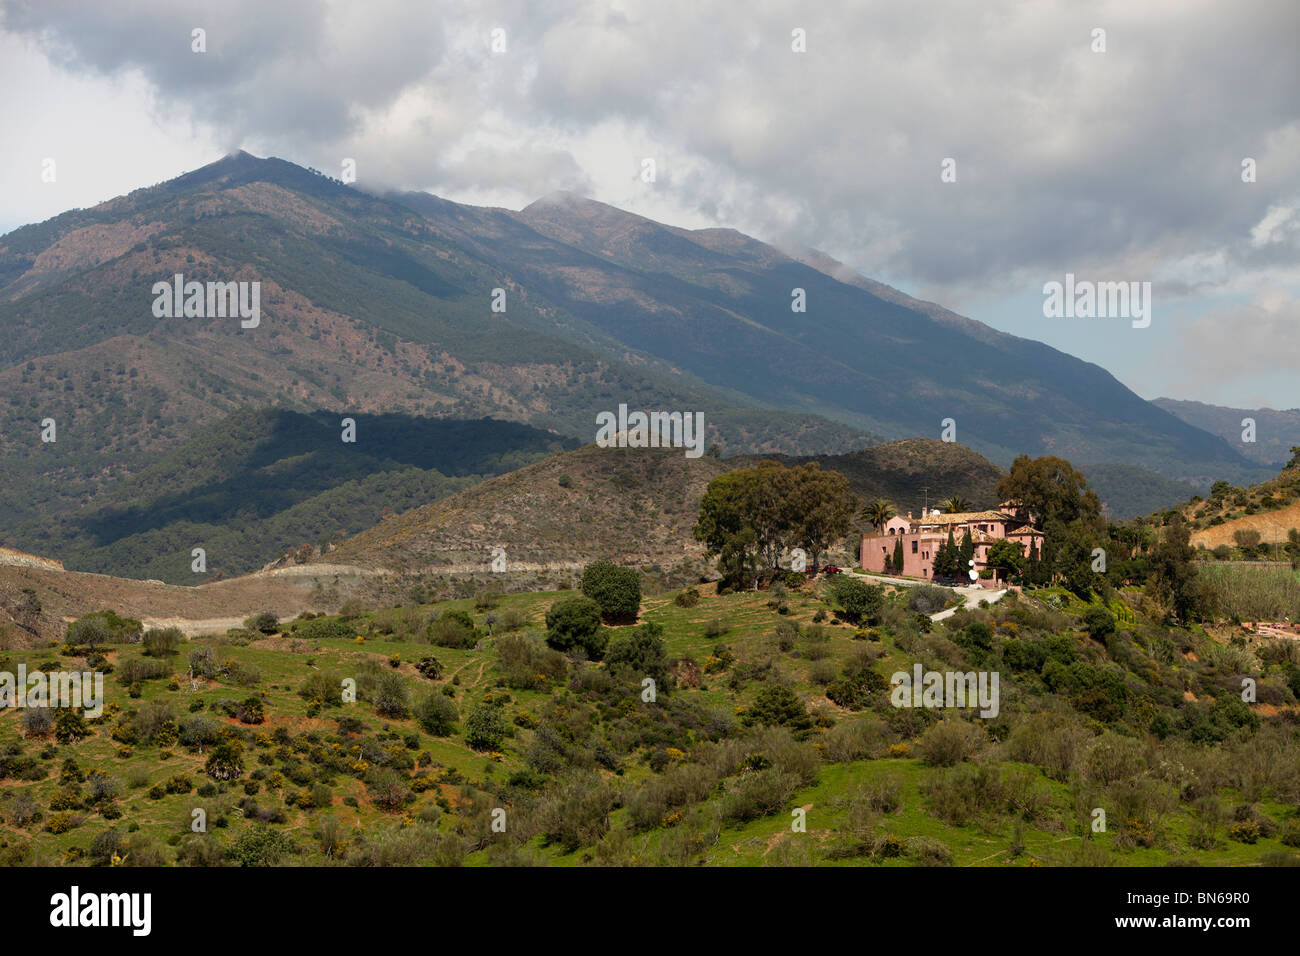 Mountain retreat in southern spain Stock Photo